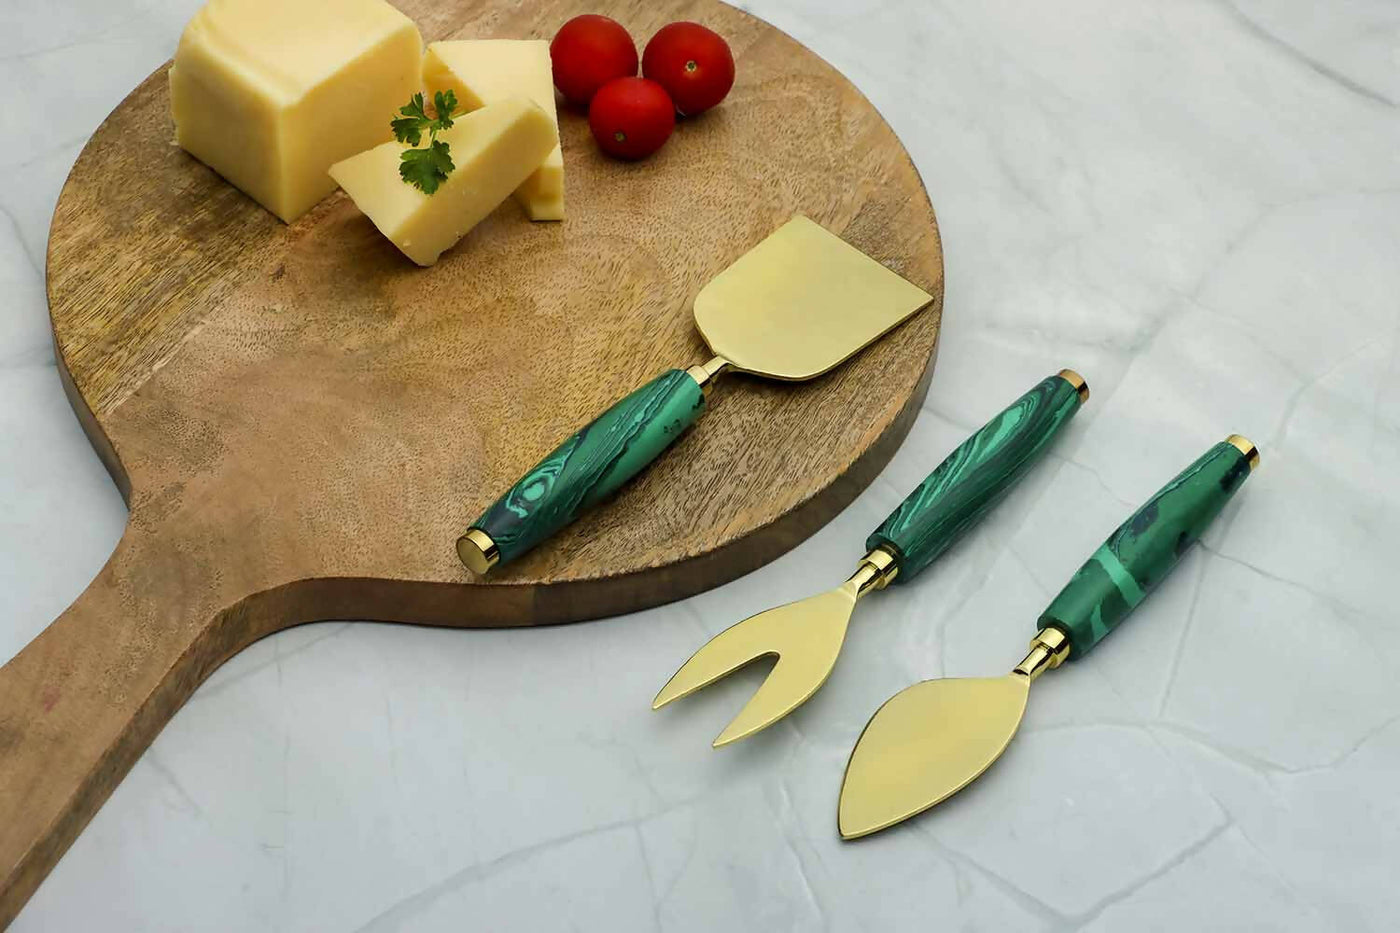 Green Stone Dust with Stainless Steel Cheese Server - Set of 3 - Dining & Kitchen - 1